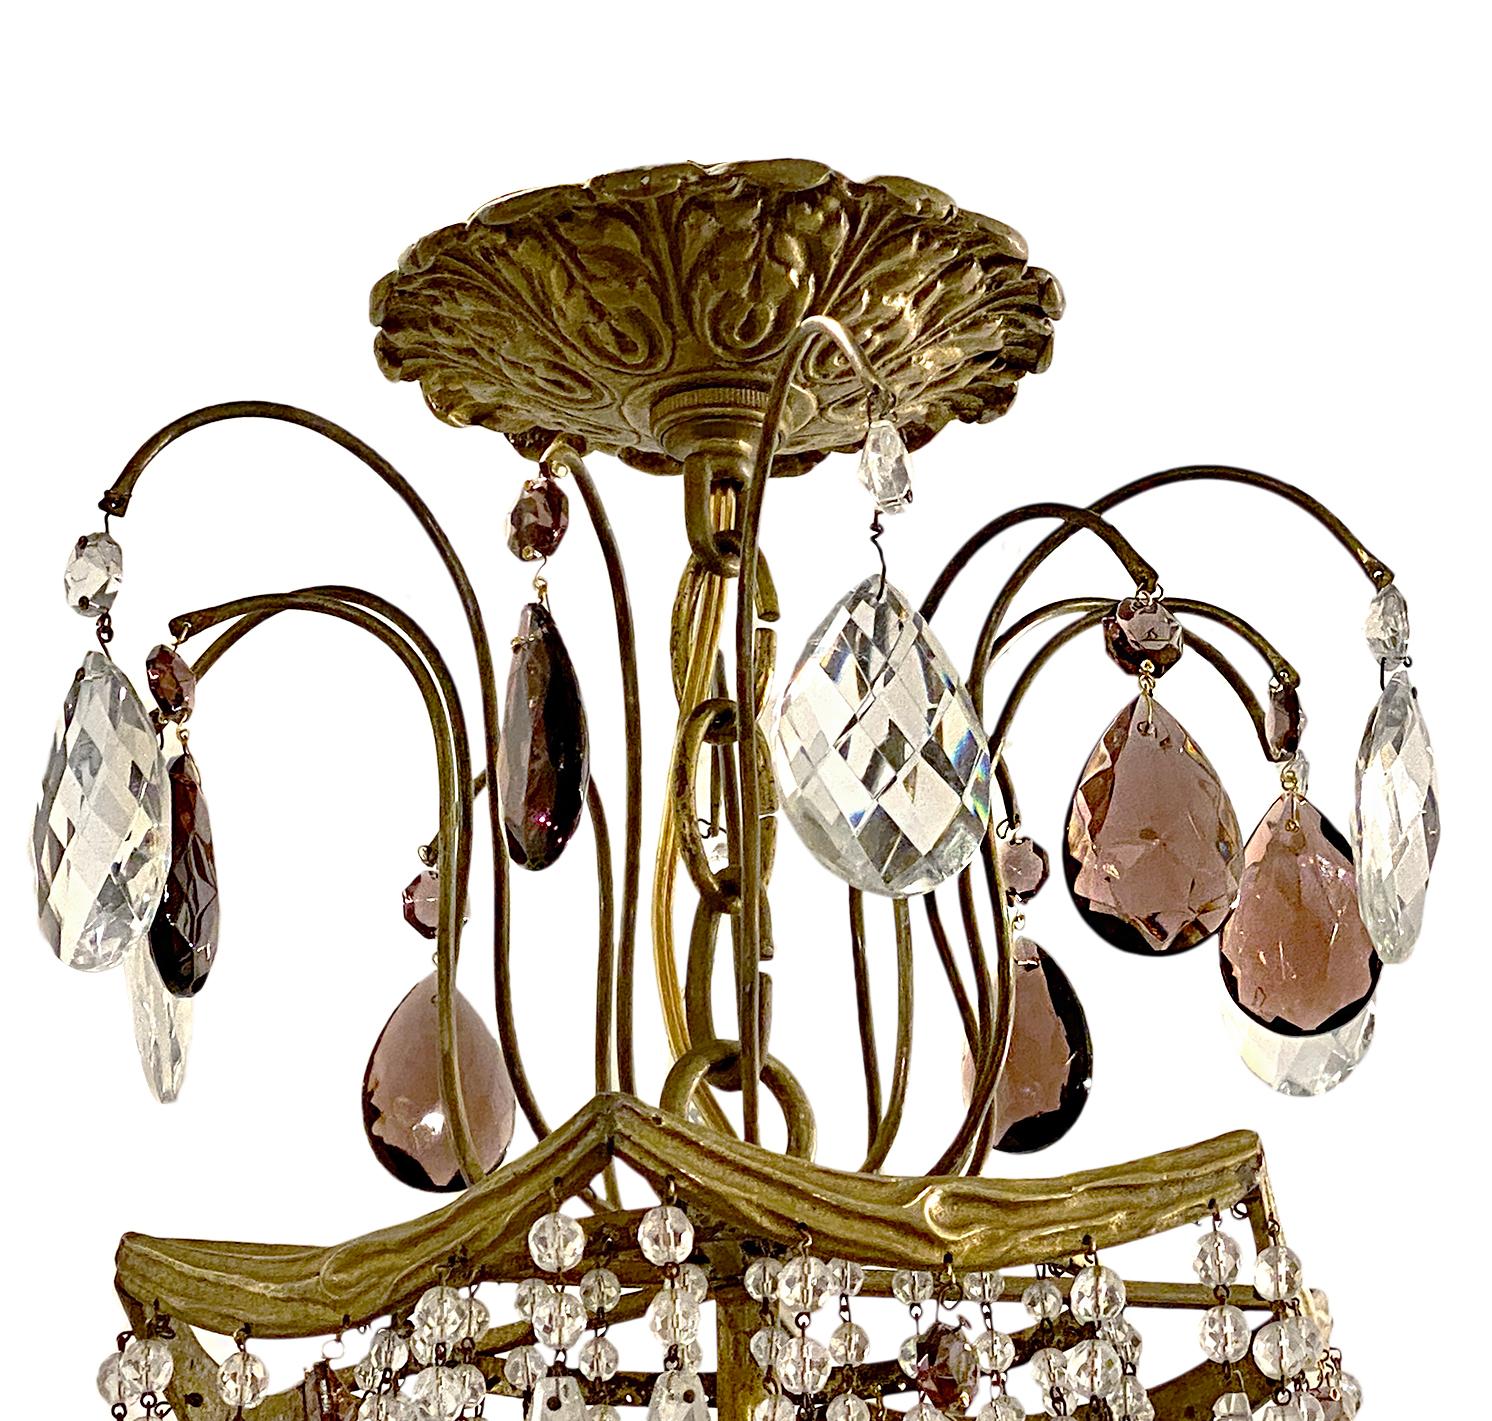 A late 19th century French chandelier with original gilt finish, swags of bronze forming the body, crystal beads chains and amethyst crystals.

Measurements:
Height 40